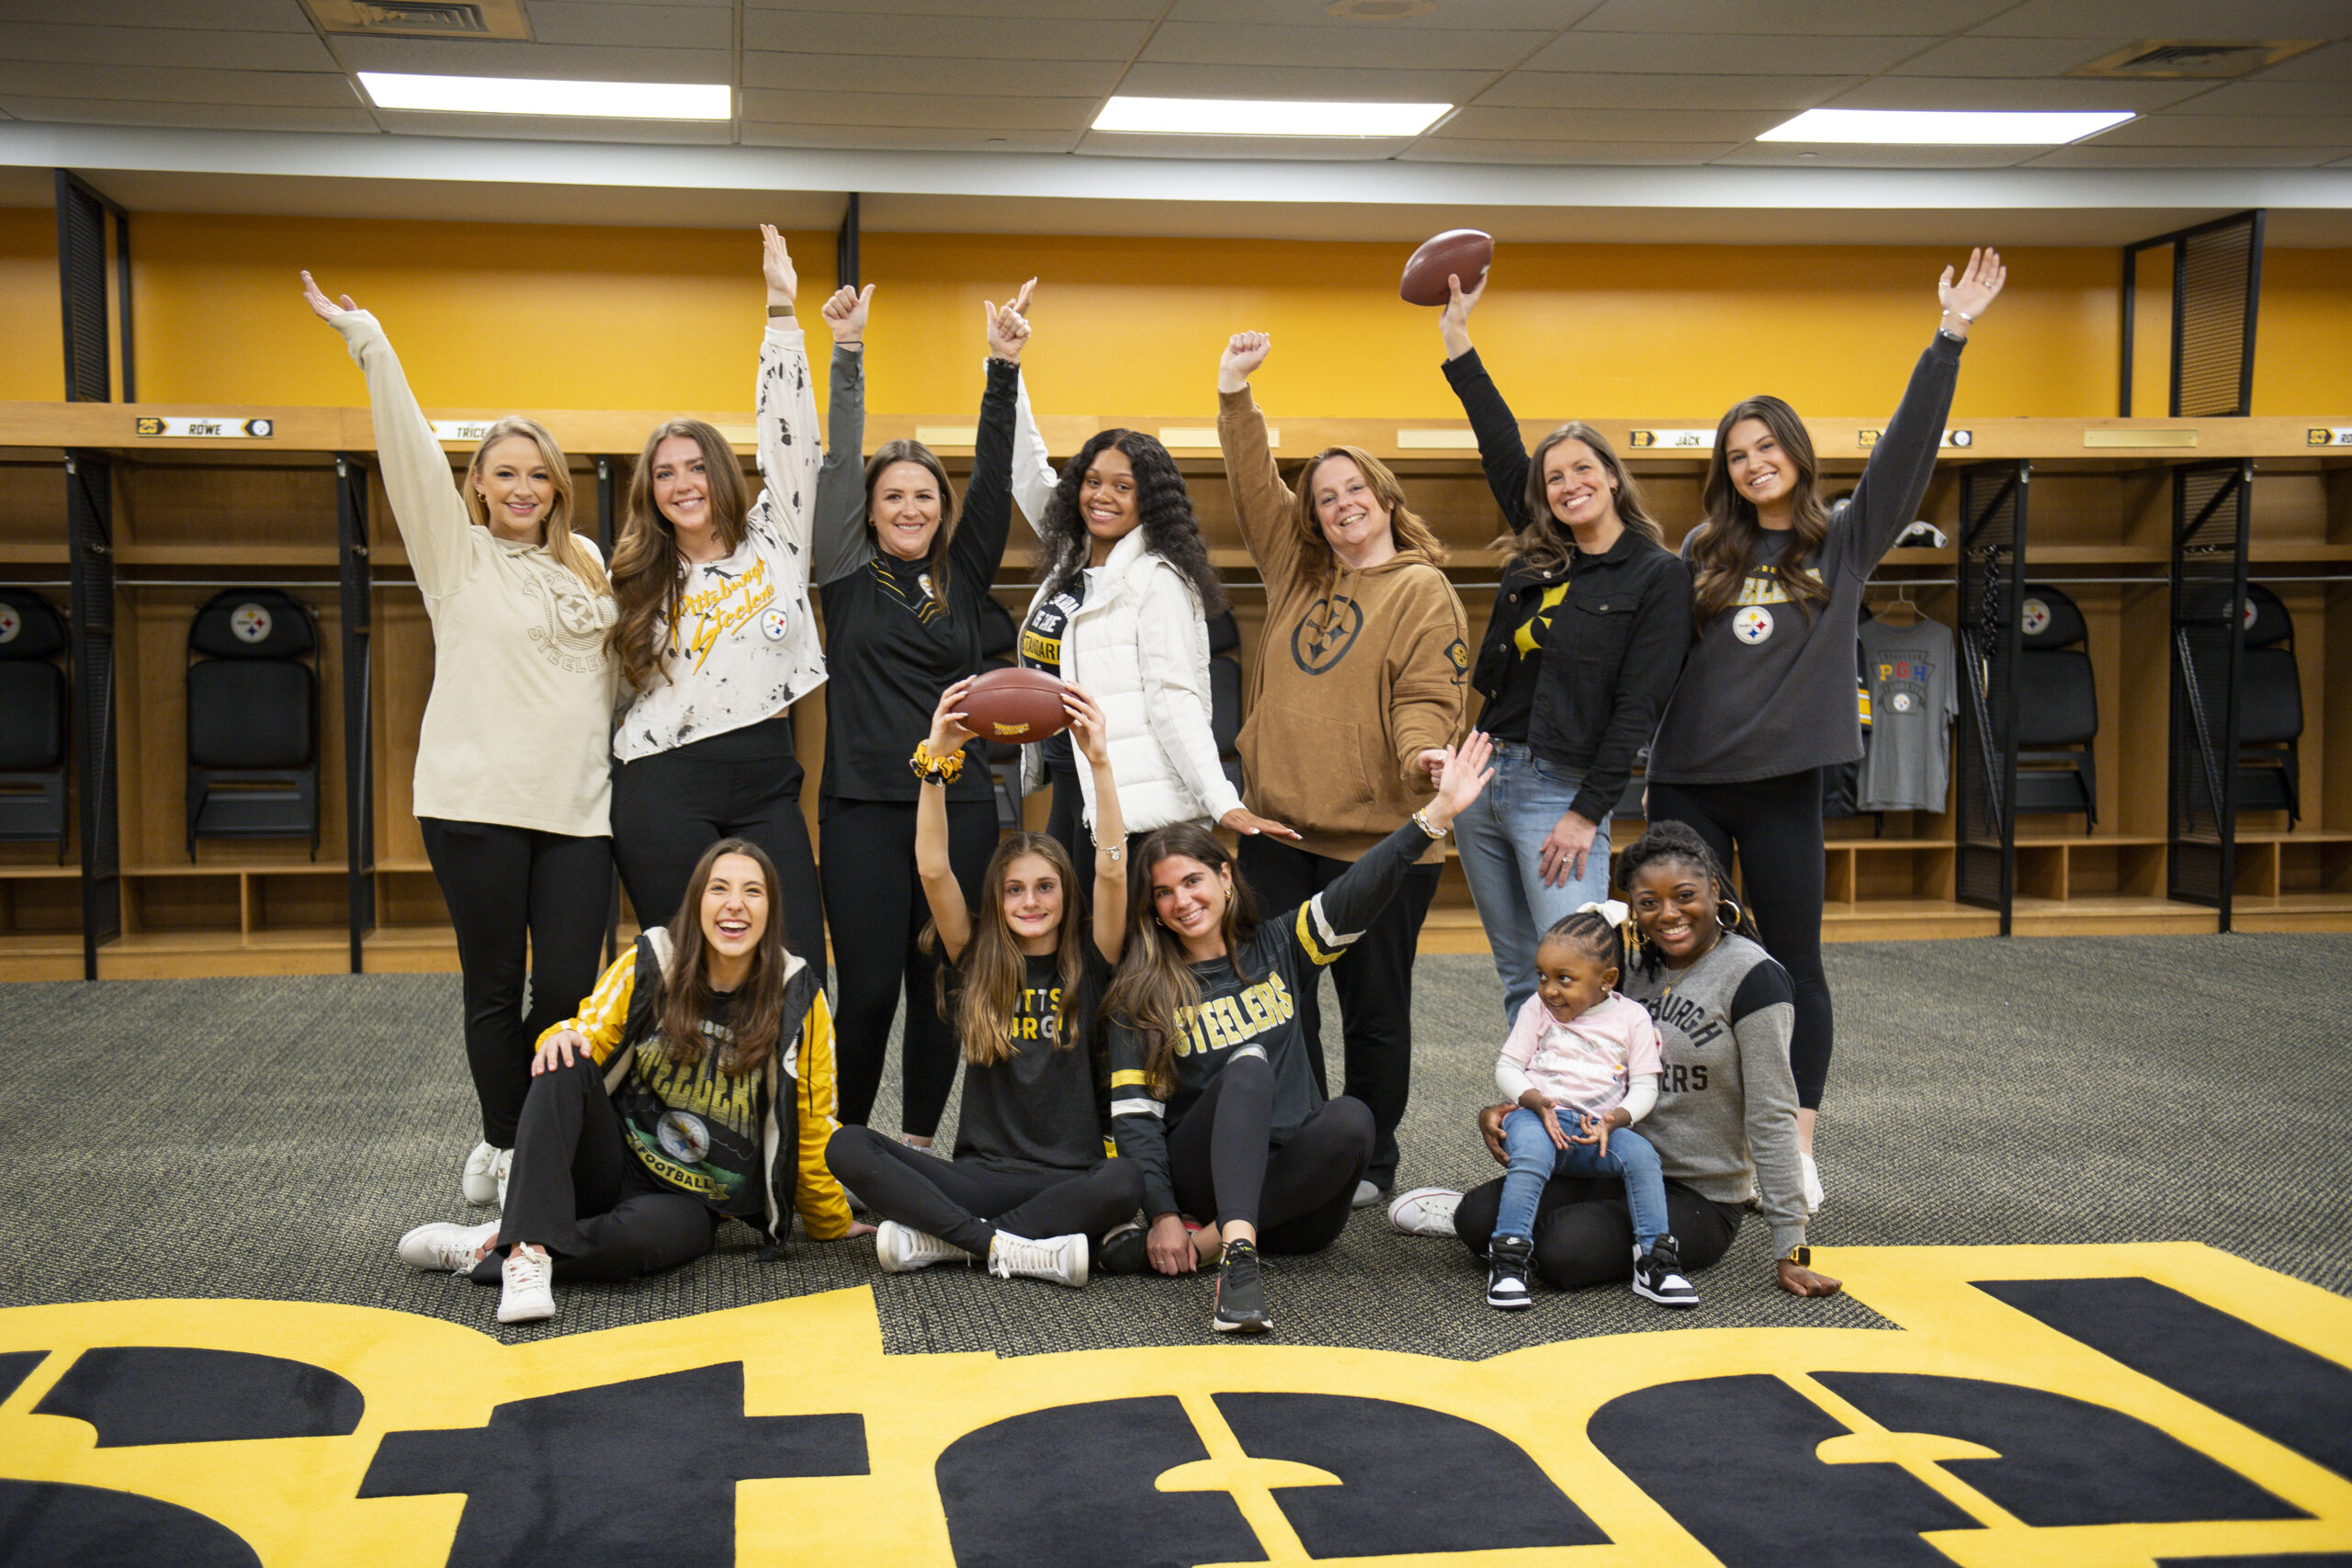 A photo of eleven women and a young girl posing with footballs and Steelers gear in the Steelers locker room at Acrisure Stadium.